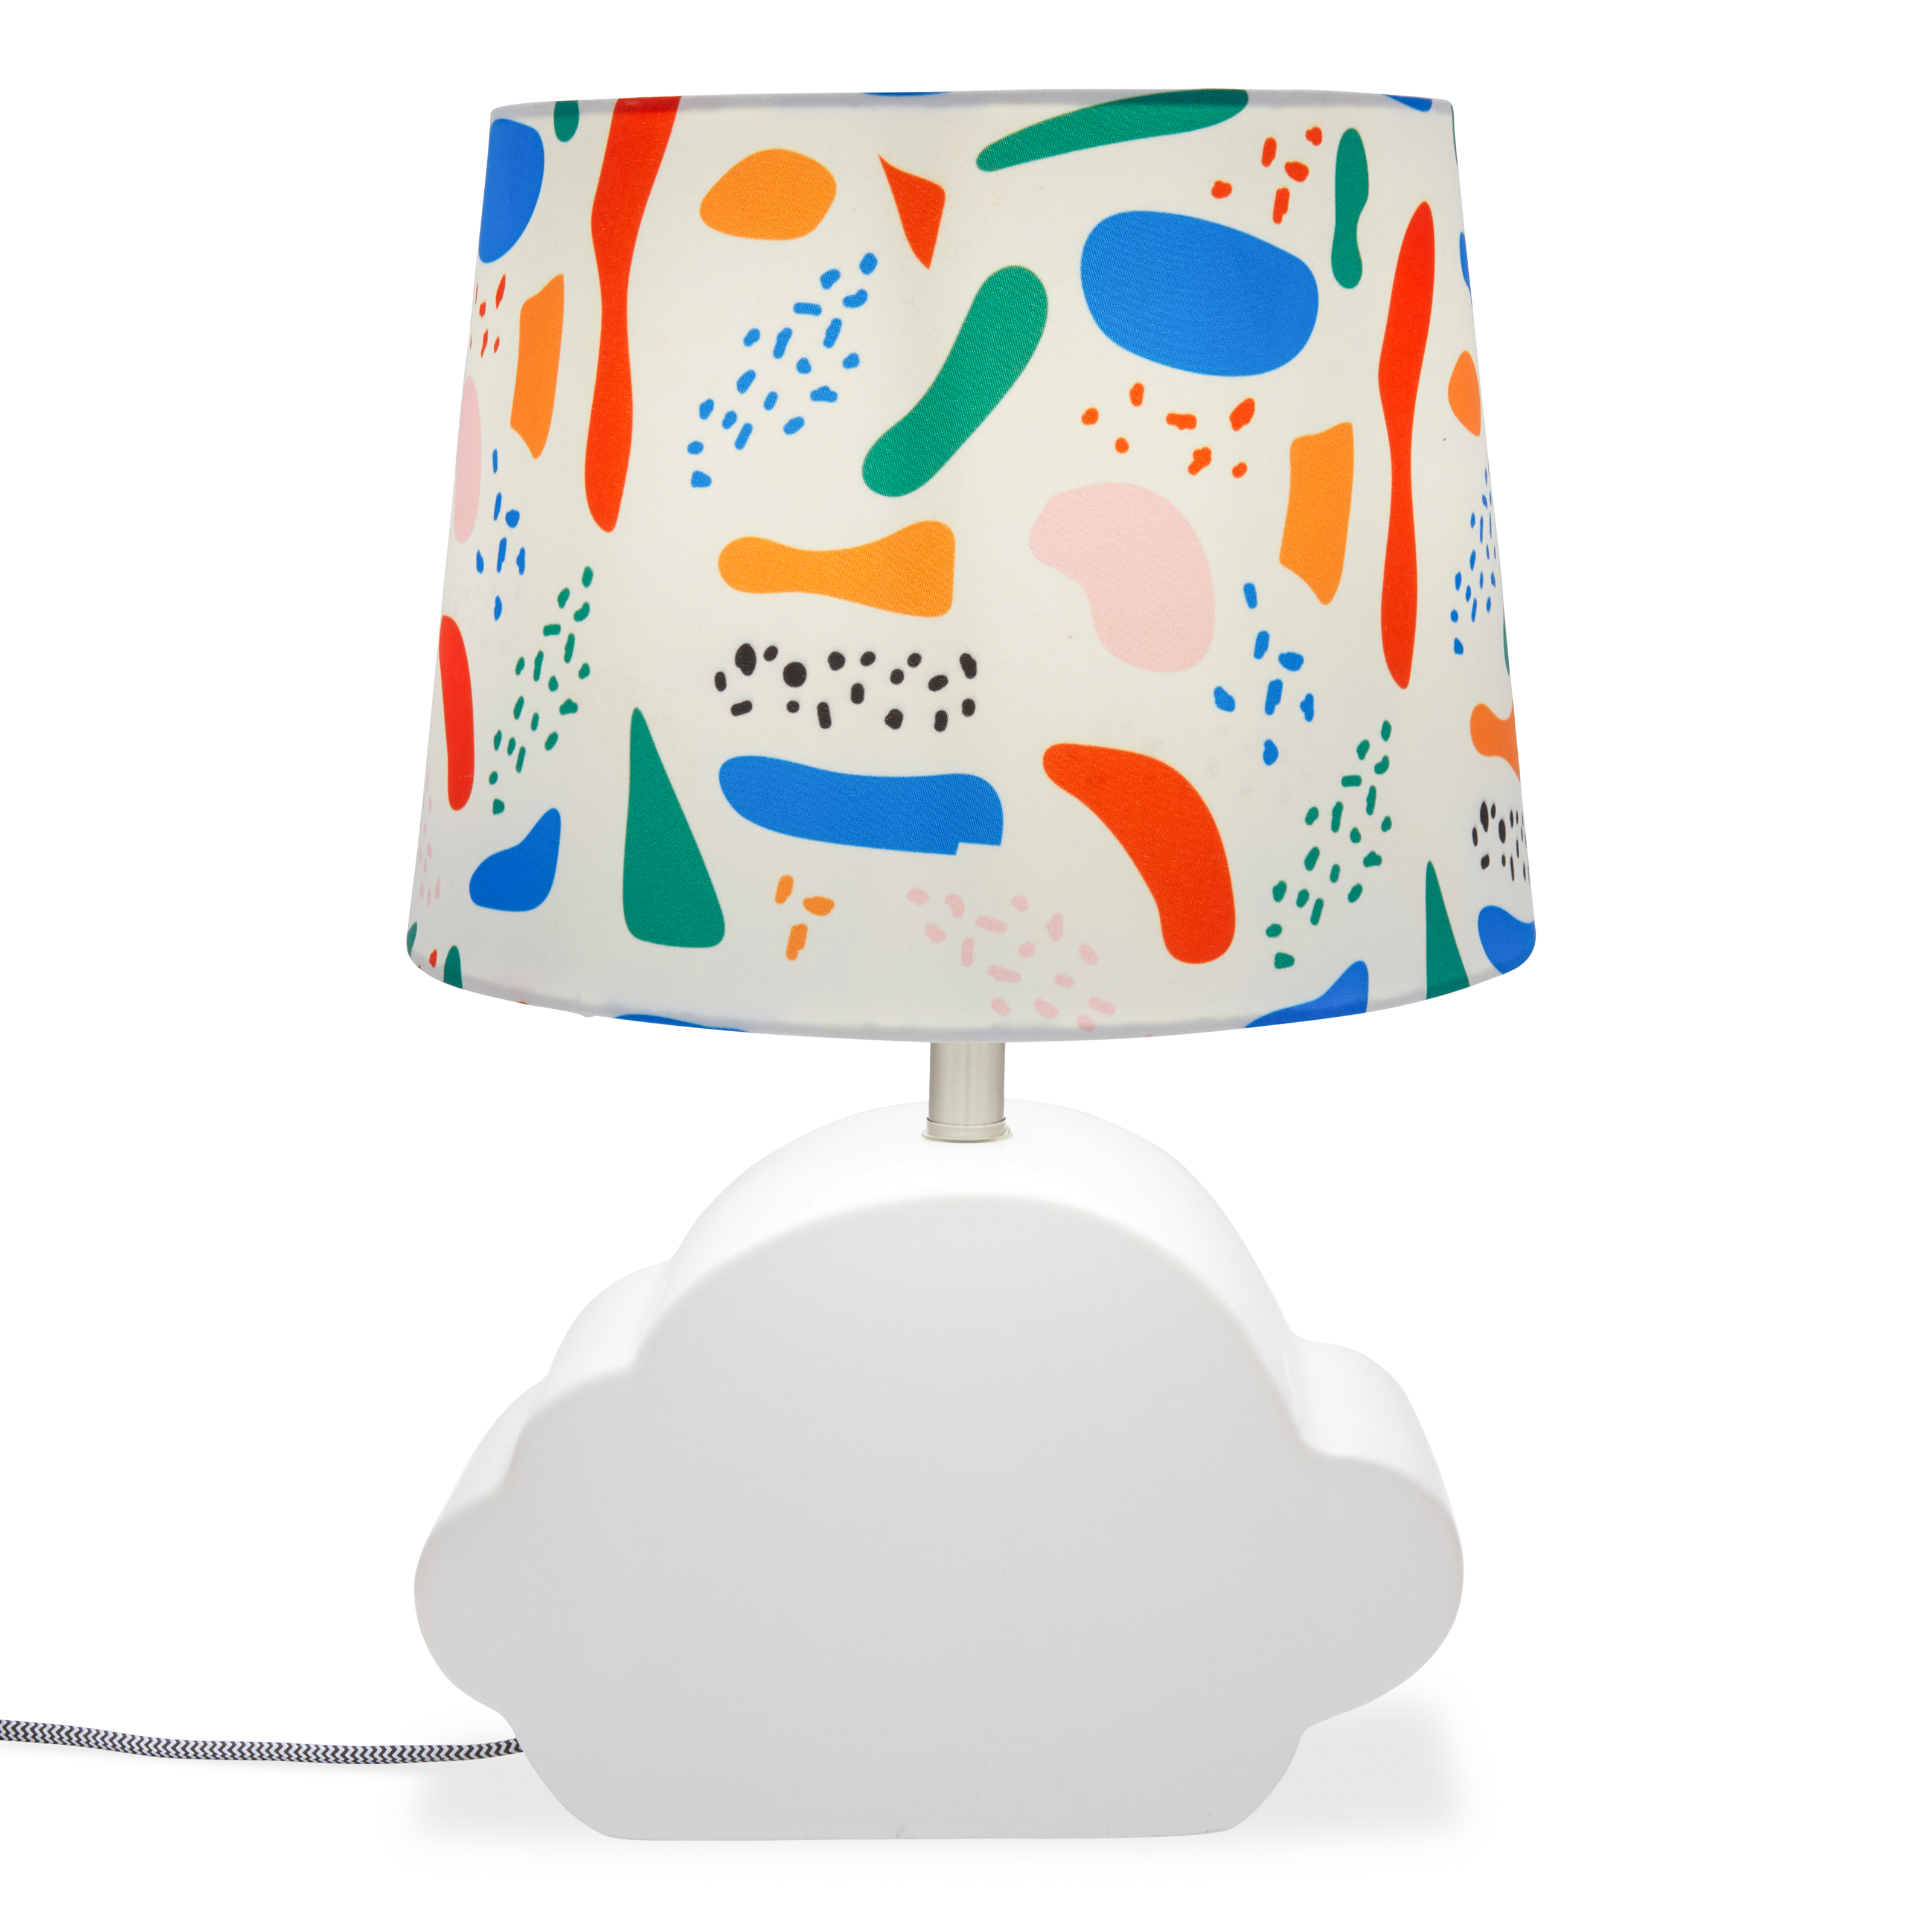 Abstract Shapes Shade with Ceramic Cloud Shaped Base by Drew Barrymore Flower Kids - image 1 of 10